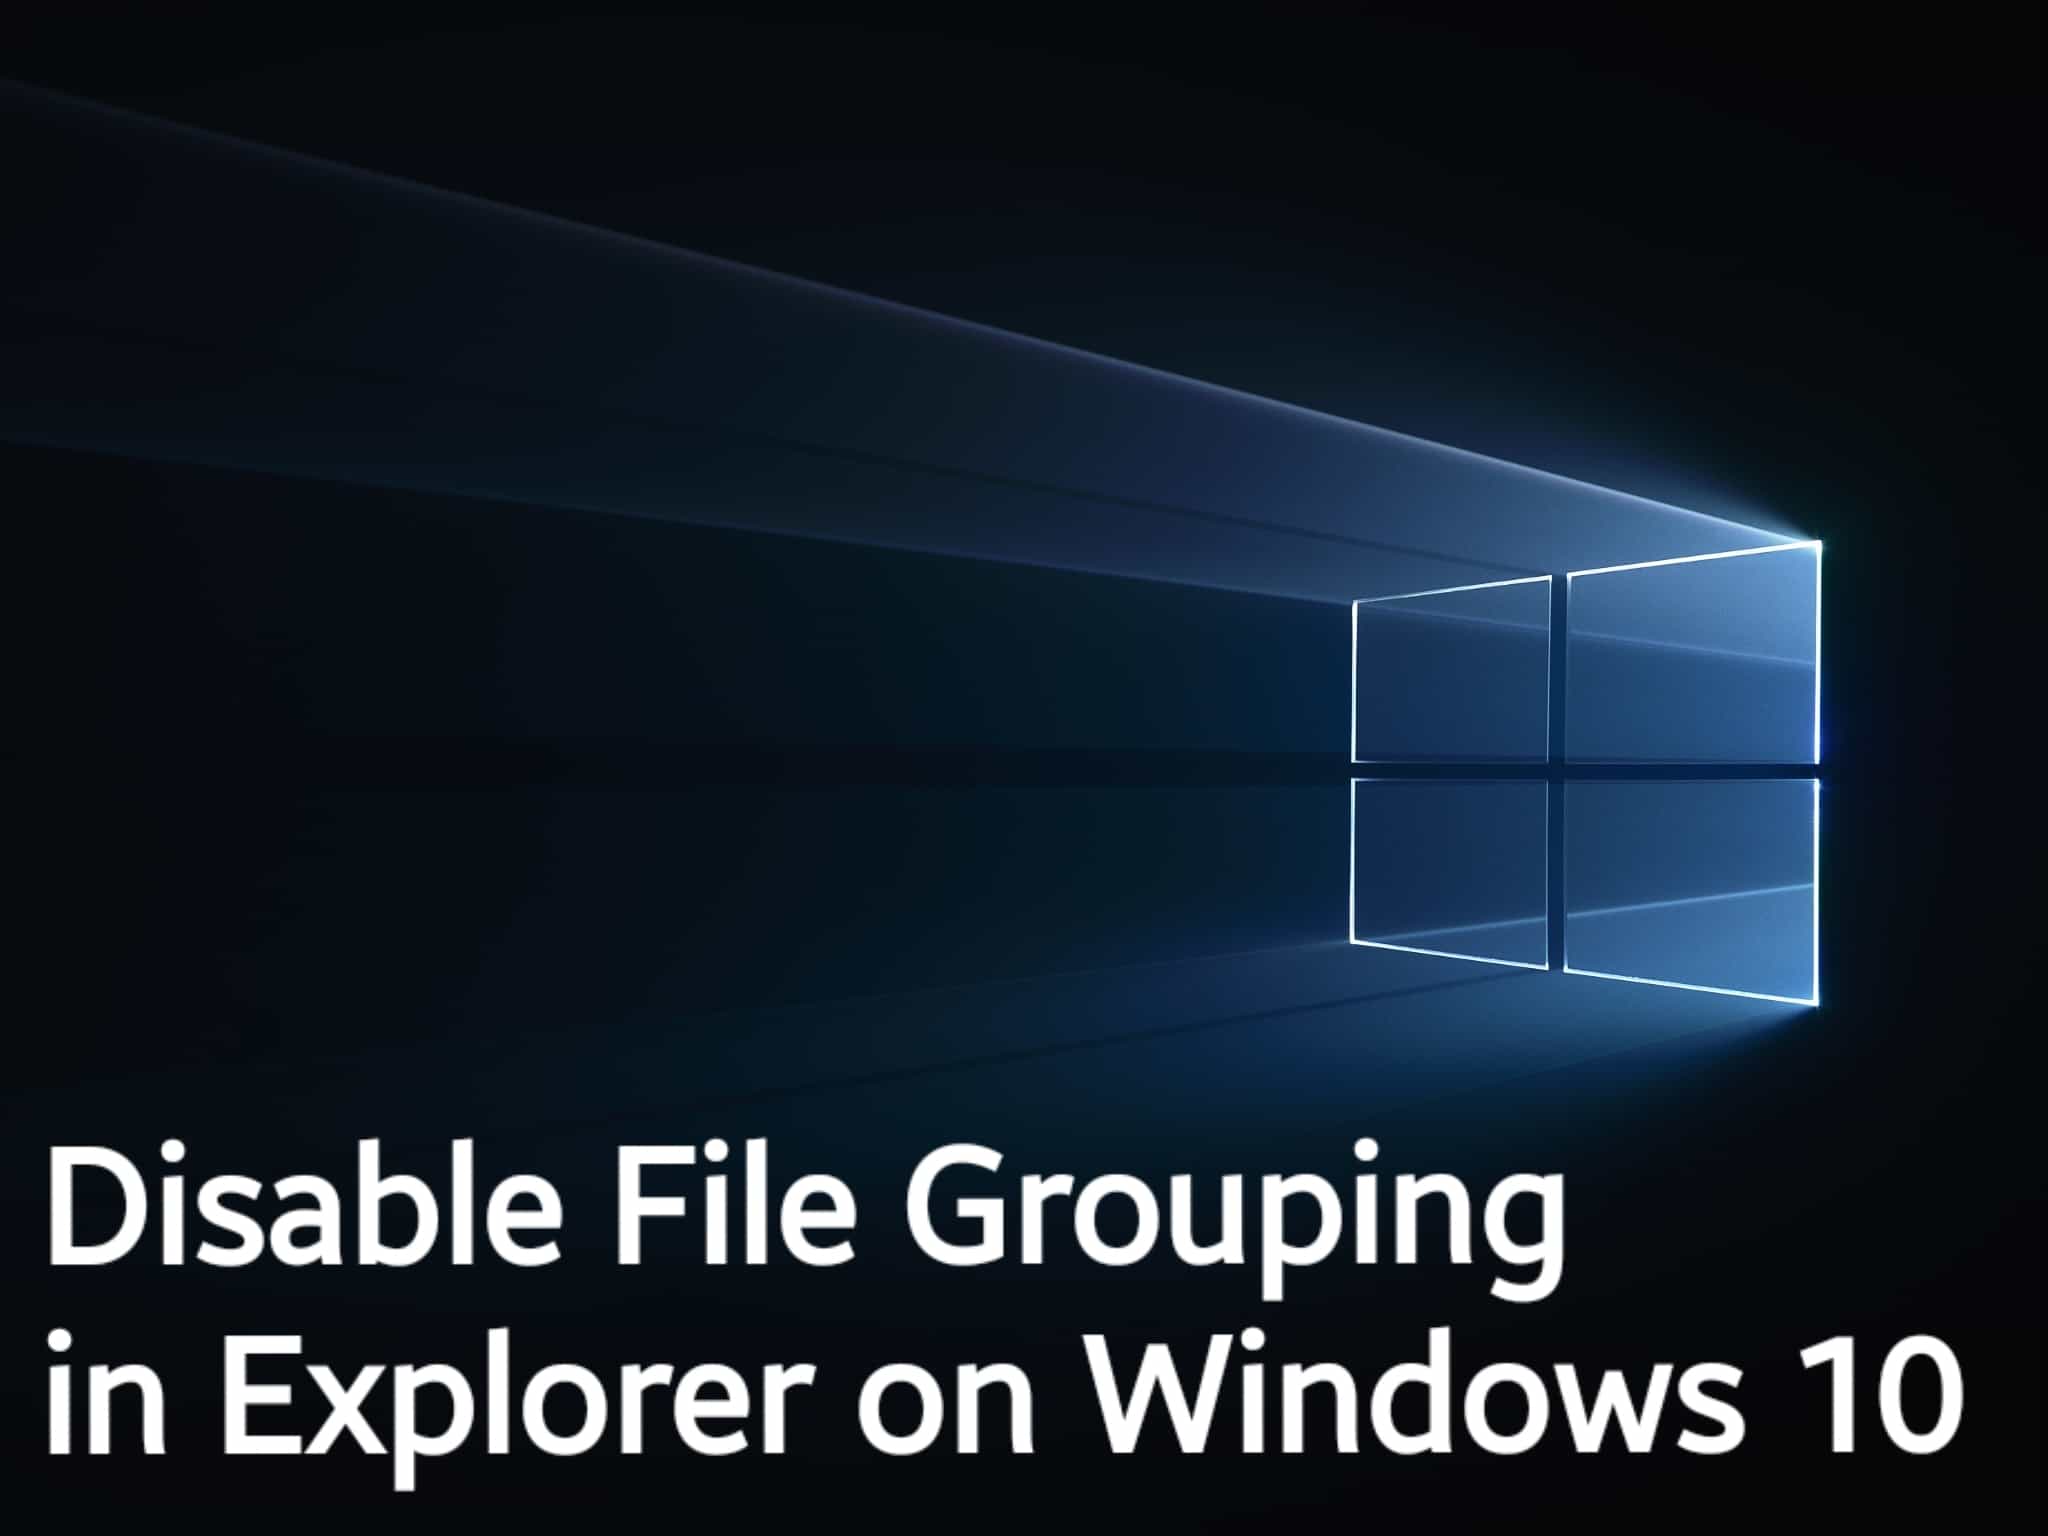 Disable File Grouping in Explorer on Windows 10